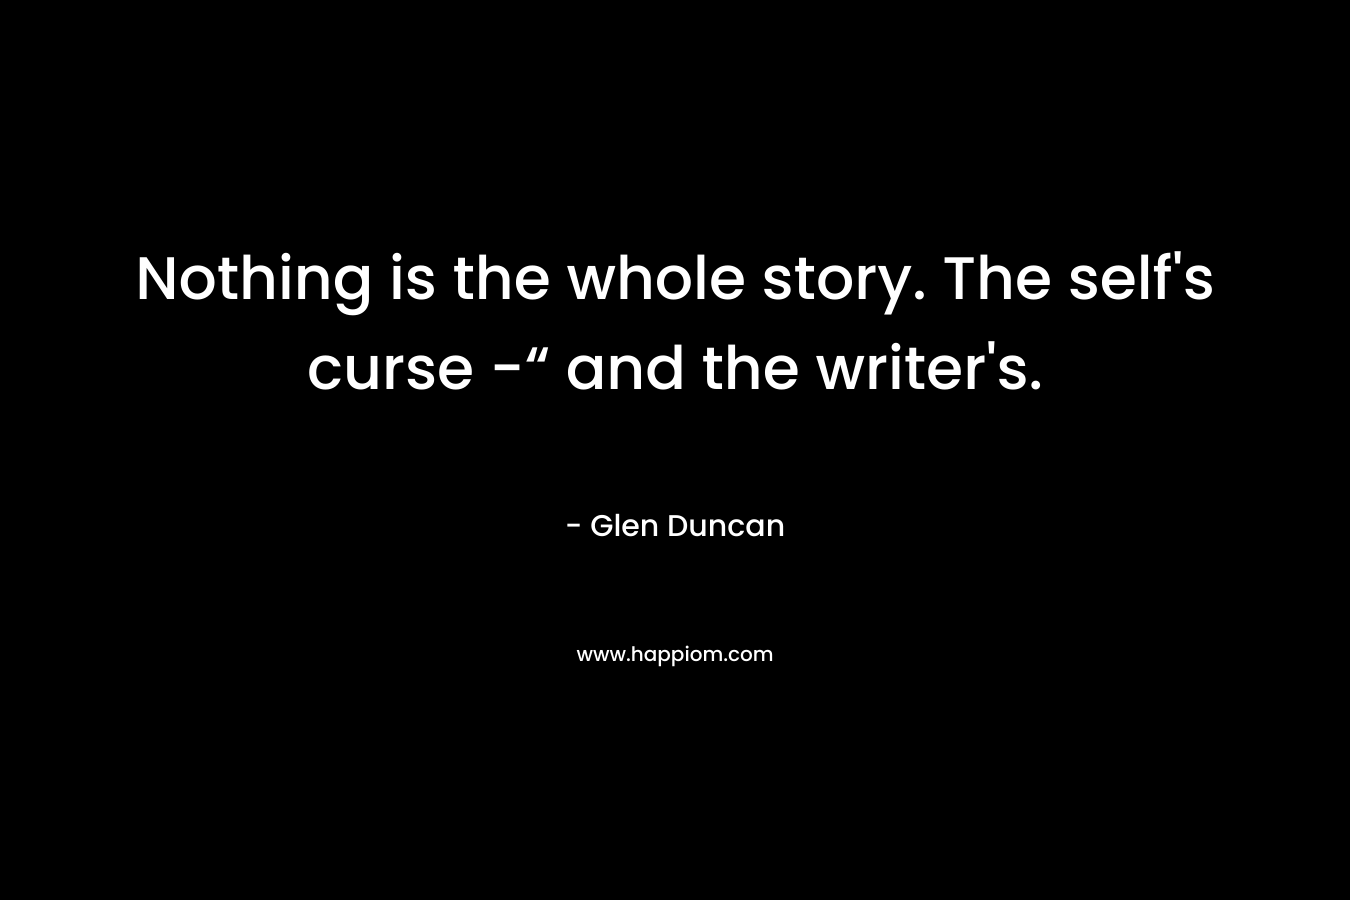 Nothing is the whole story. The self’s curse -“ and the writer’s. – Glen Duncan